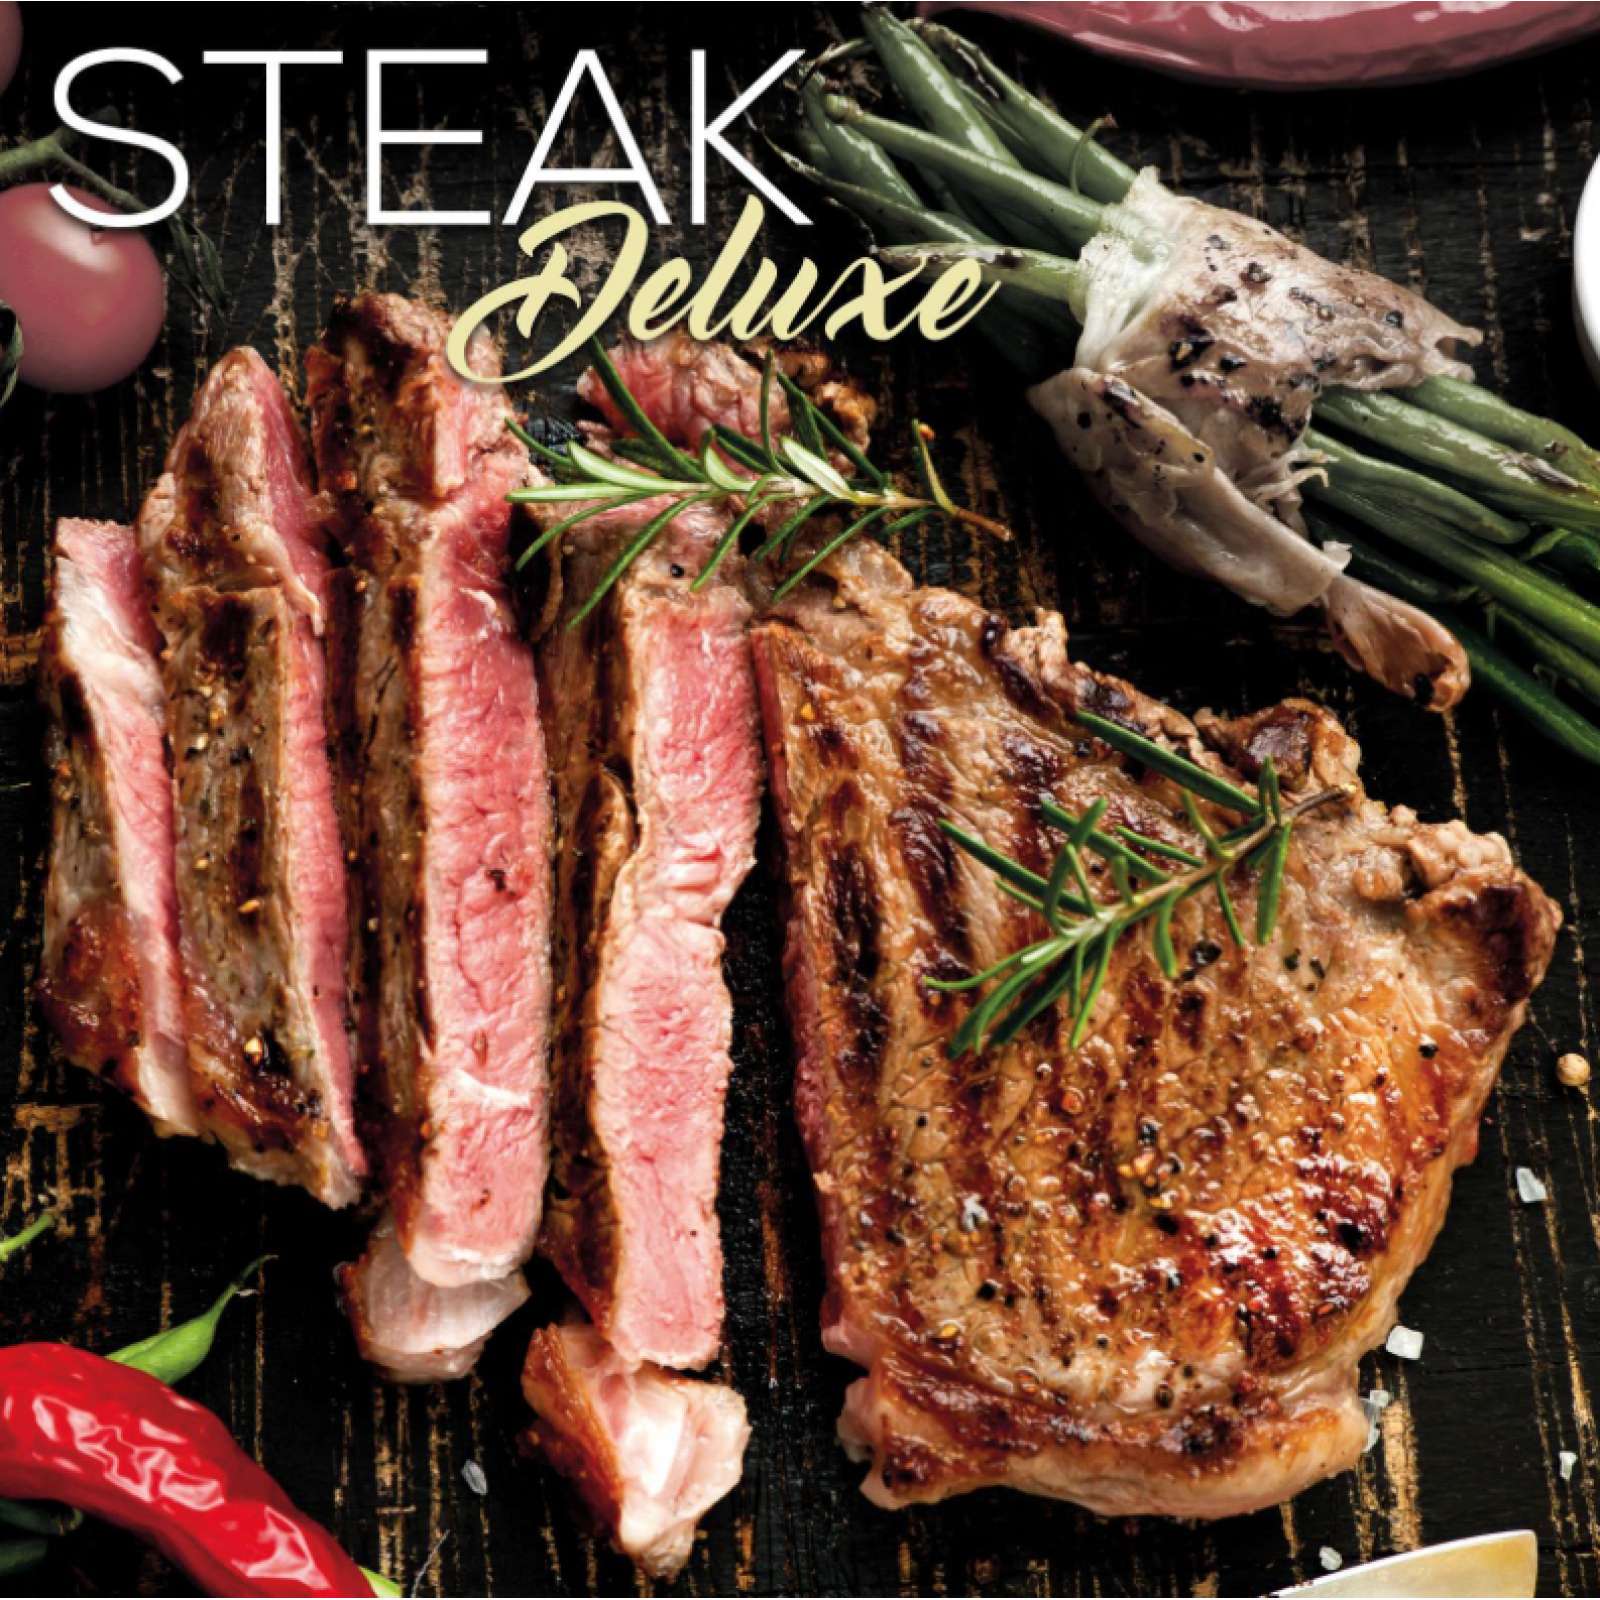 25.07.2024 Grillkurs STEAK Deluxe - Tomahawk, Prime Rib, Dry Aged - Donnerstag - 4 bis 5 Std.